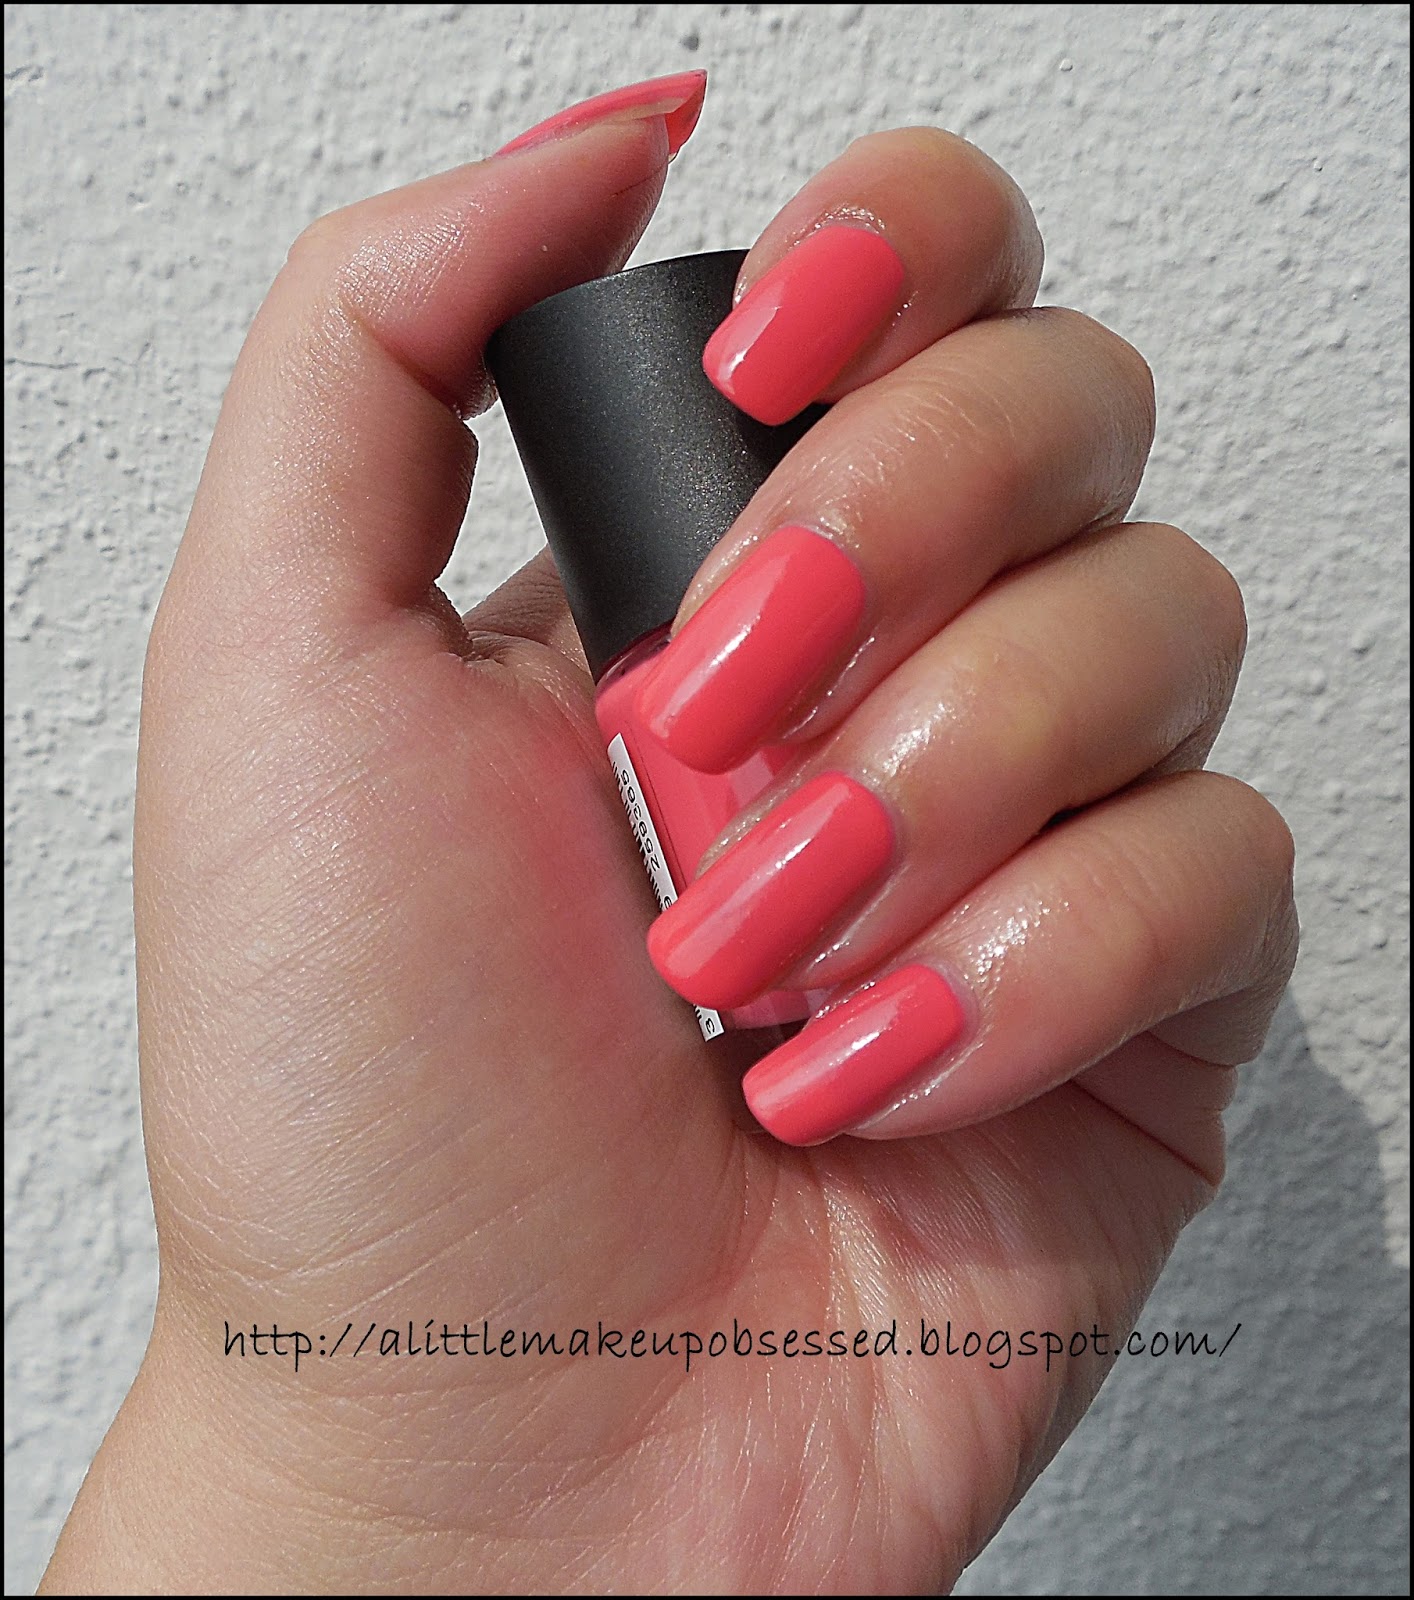 Notd Rimmel London Salon Pro 313 Cocktail Passion A Little Make Up Obsessed